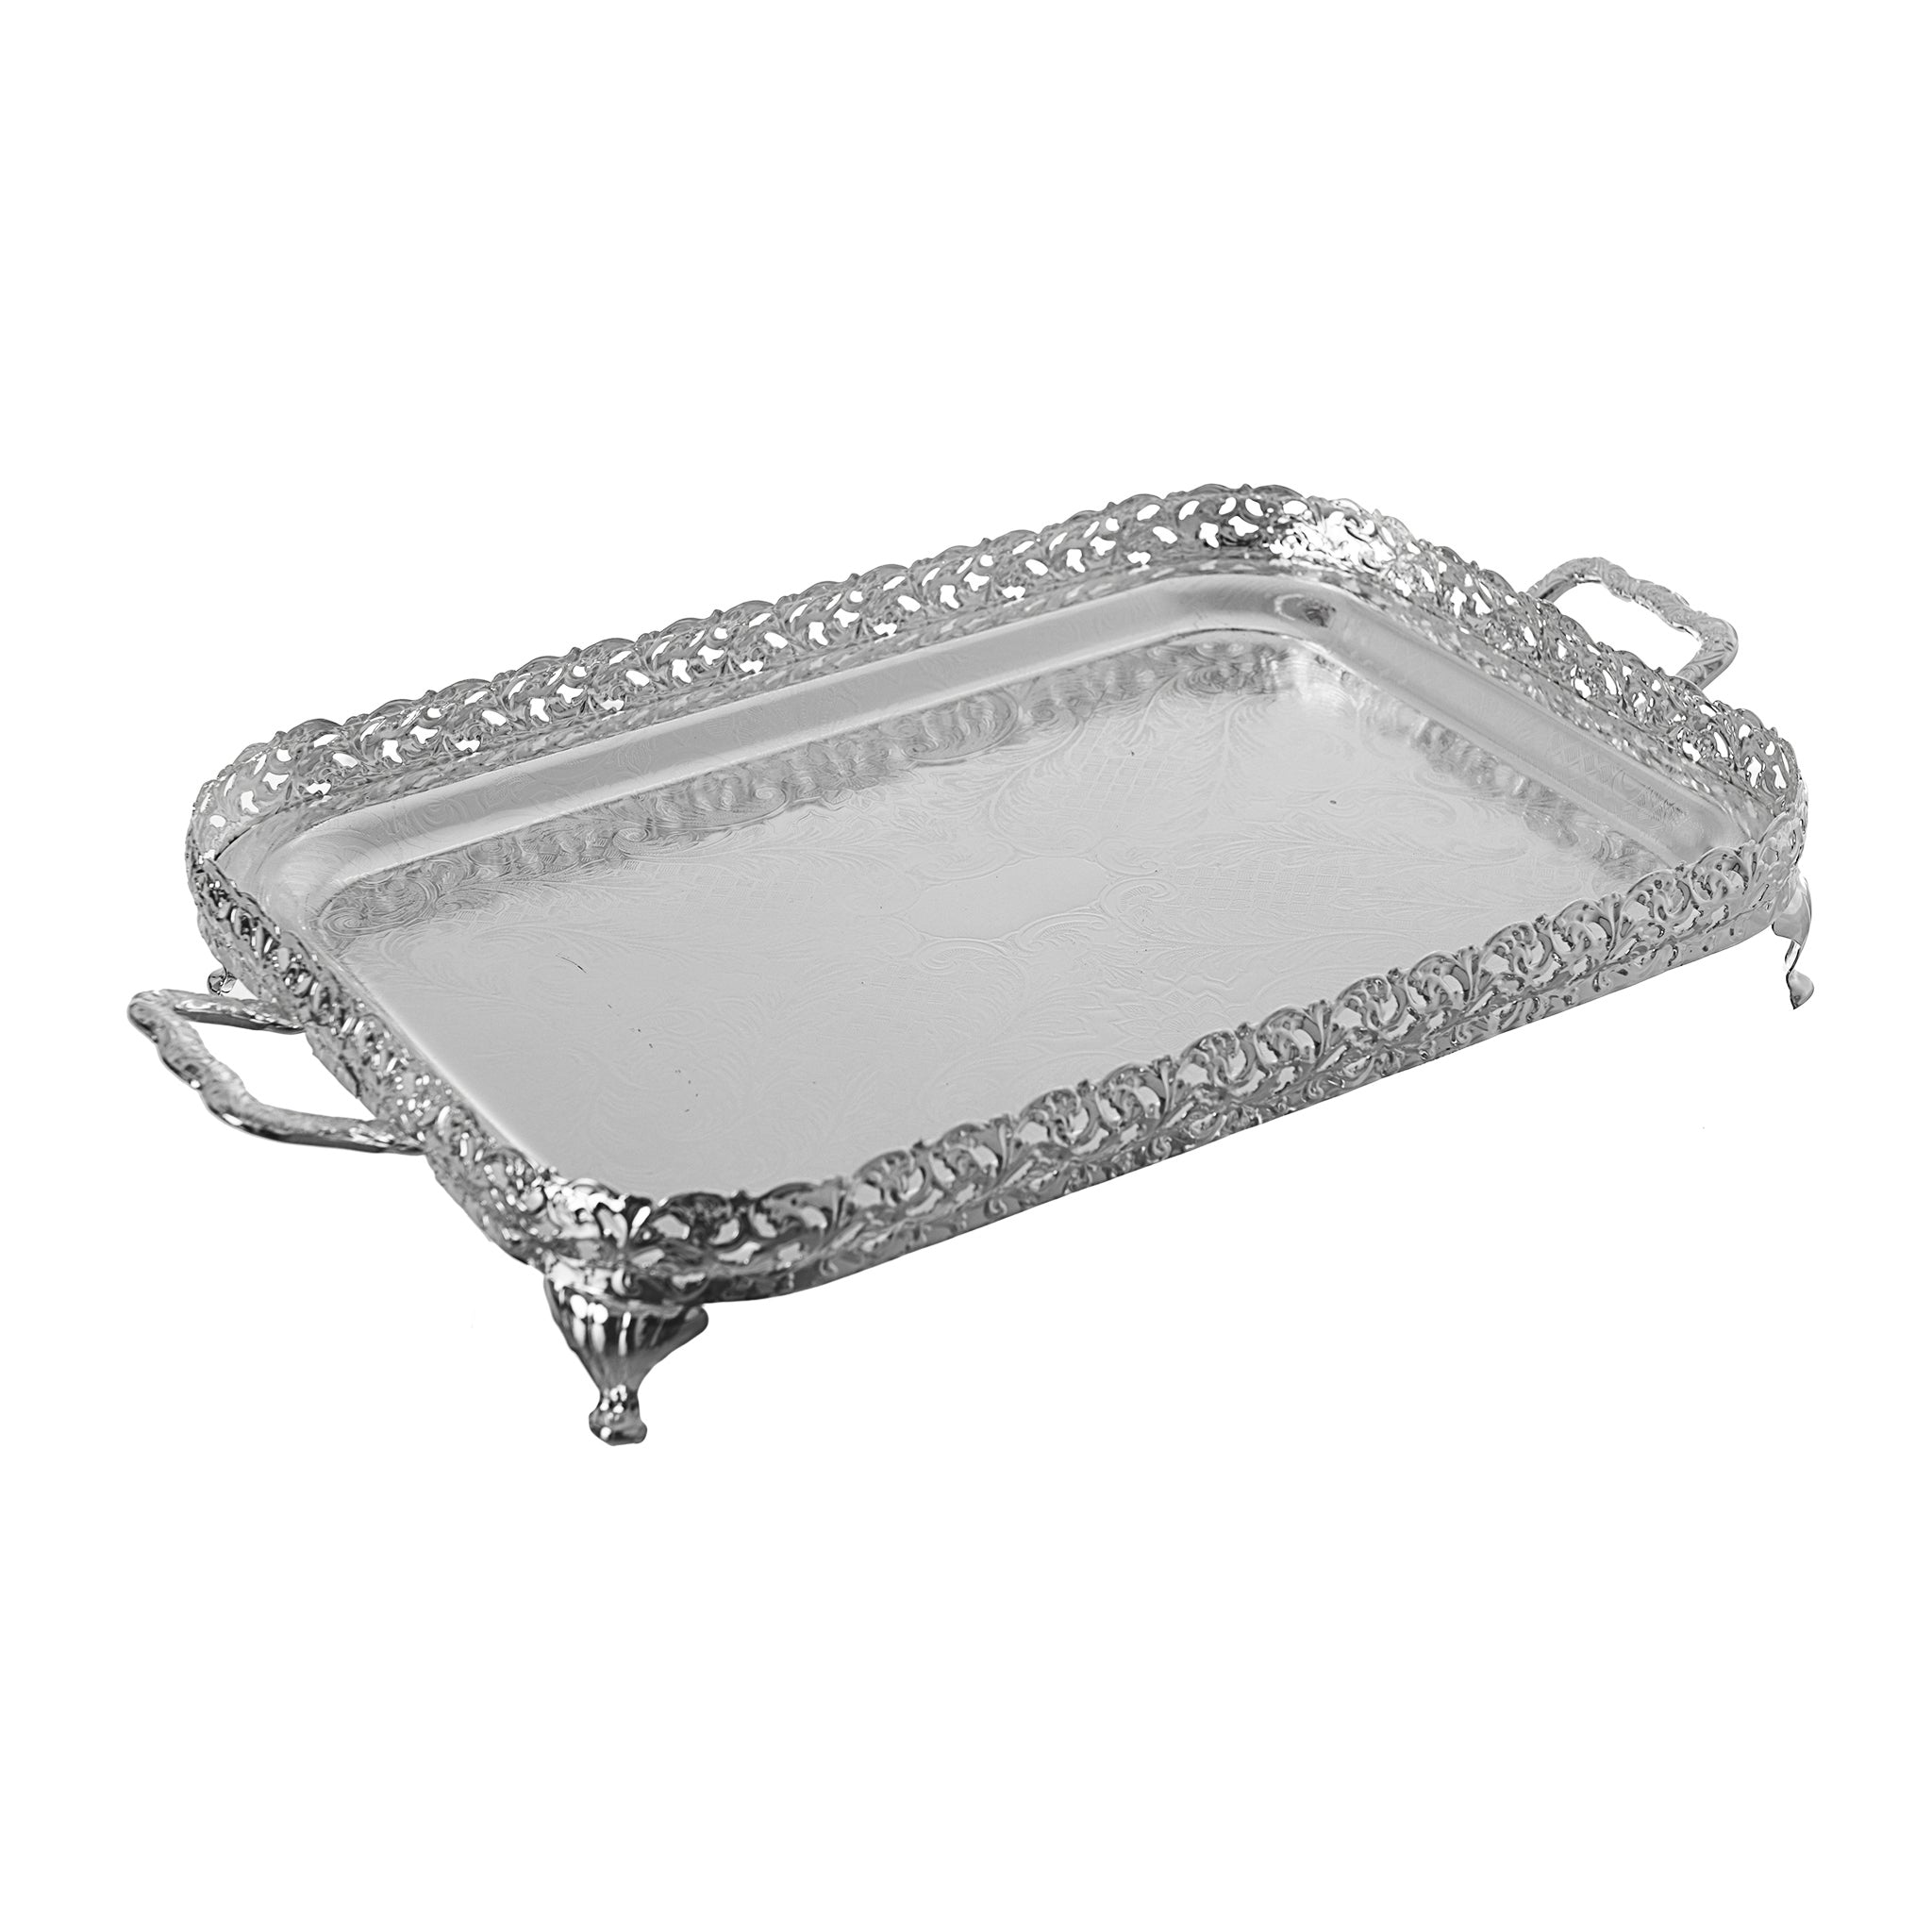 Queen Anne - Rectangular Tray with Handles & Legs - Silver Plated Metal - 50x29cm - 26000269